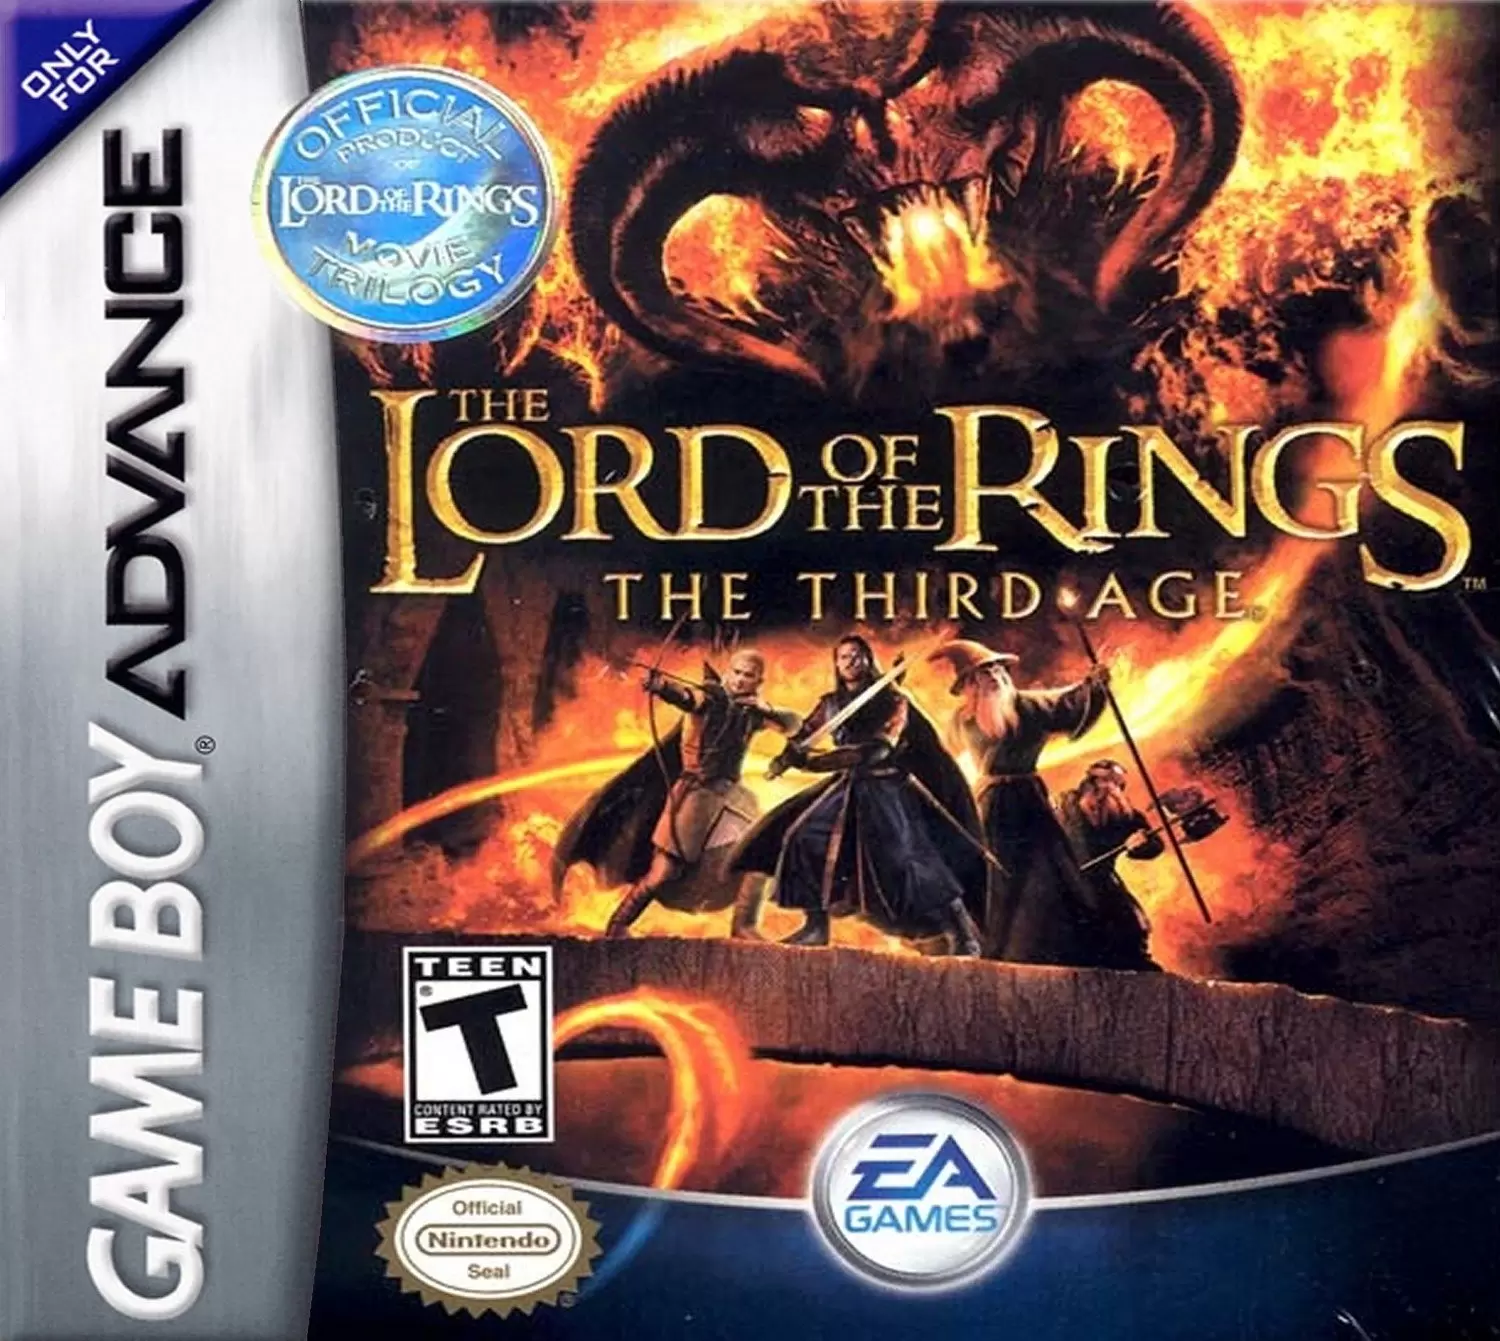 Game Boy Advance Games - The Lord of the Rings: The Third Age